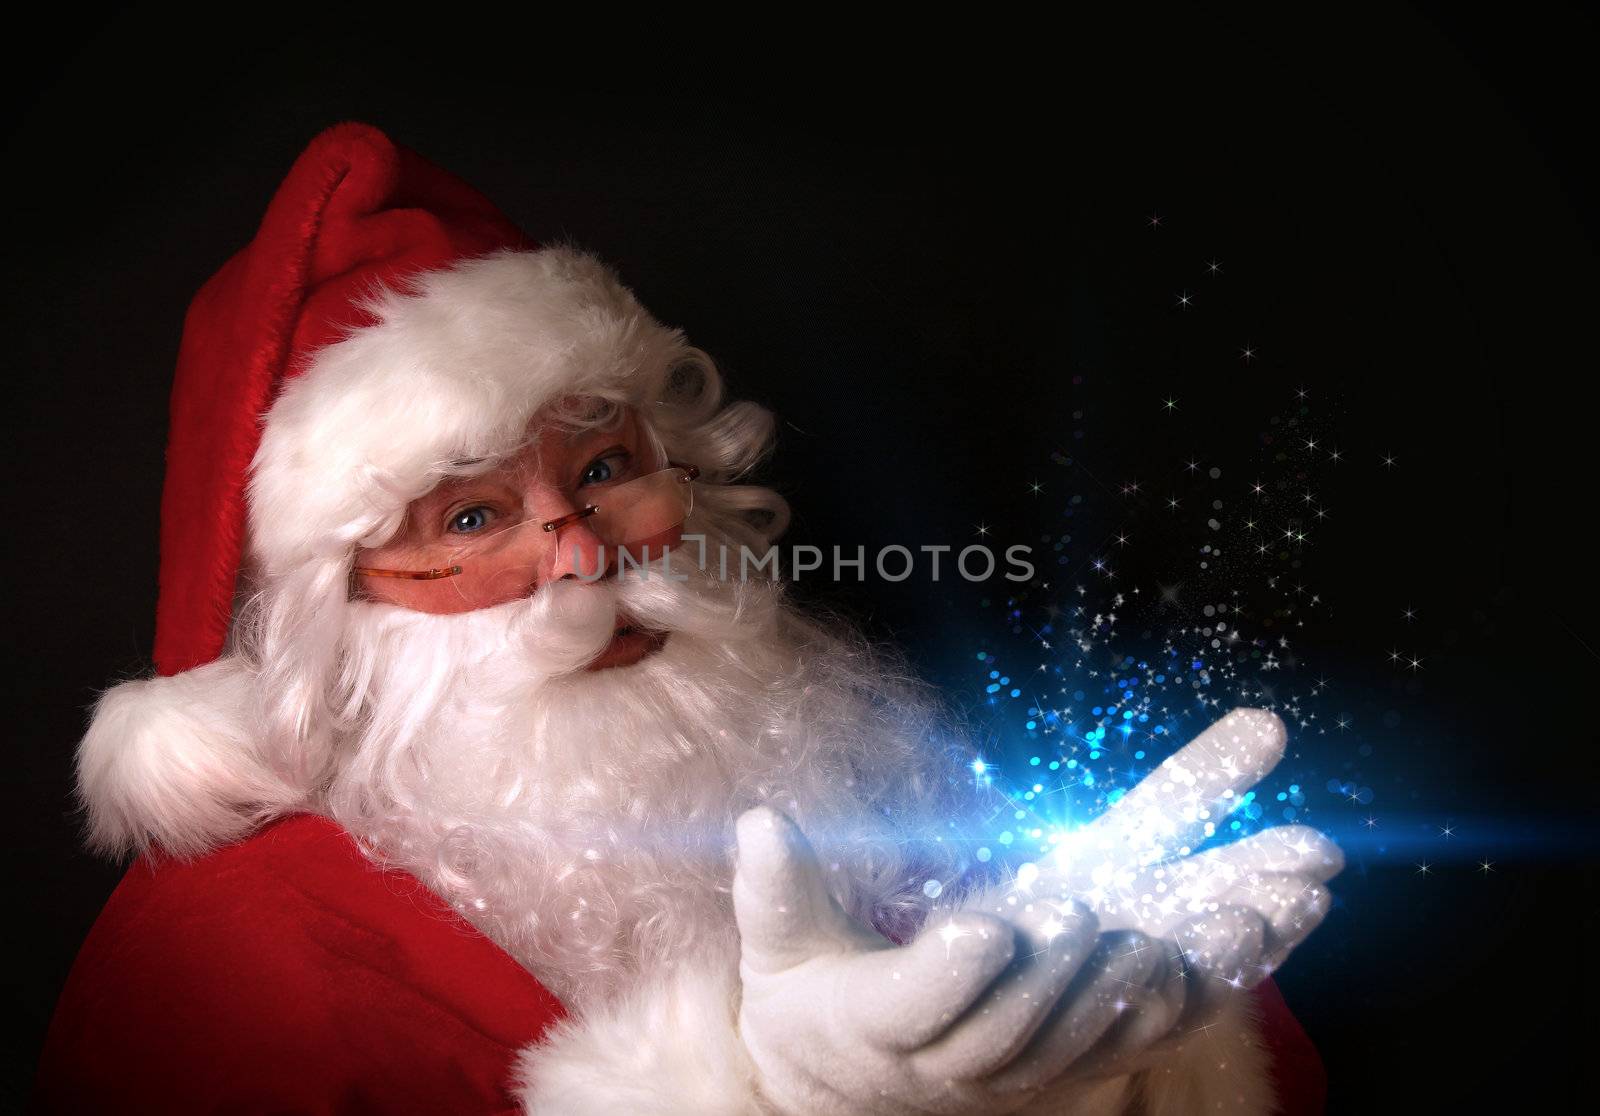 Christmas theme with Santa holding magical lights in hands